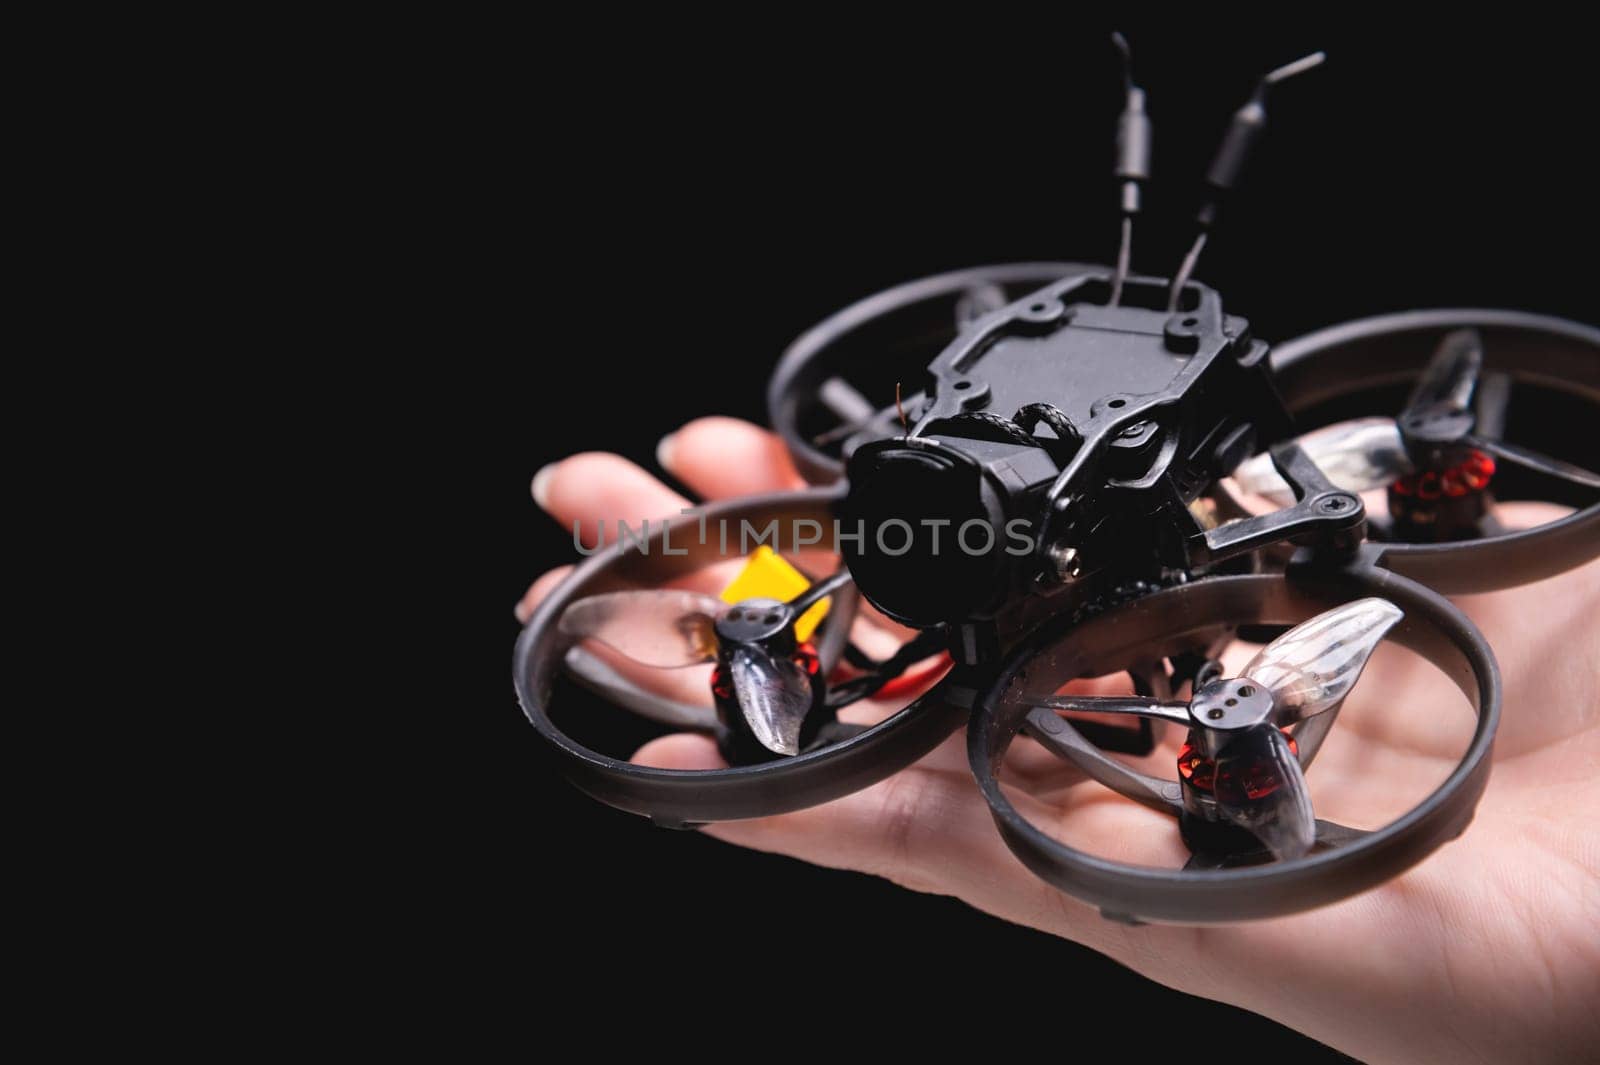 Hands holding a racing drone with a camera. Woman holding a radio-controlled mini quadcopter.